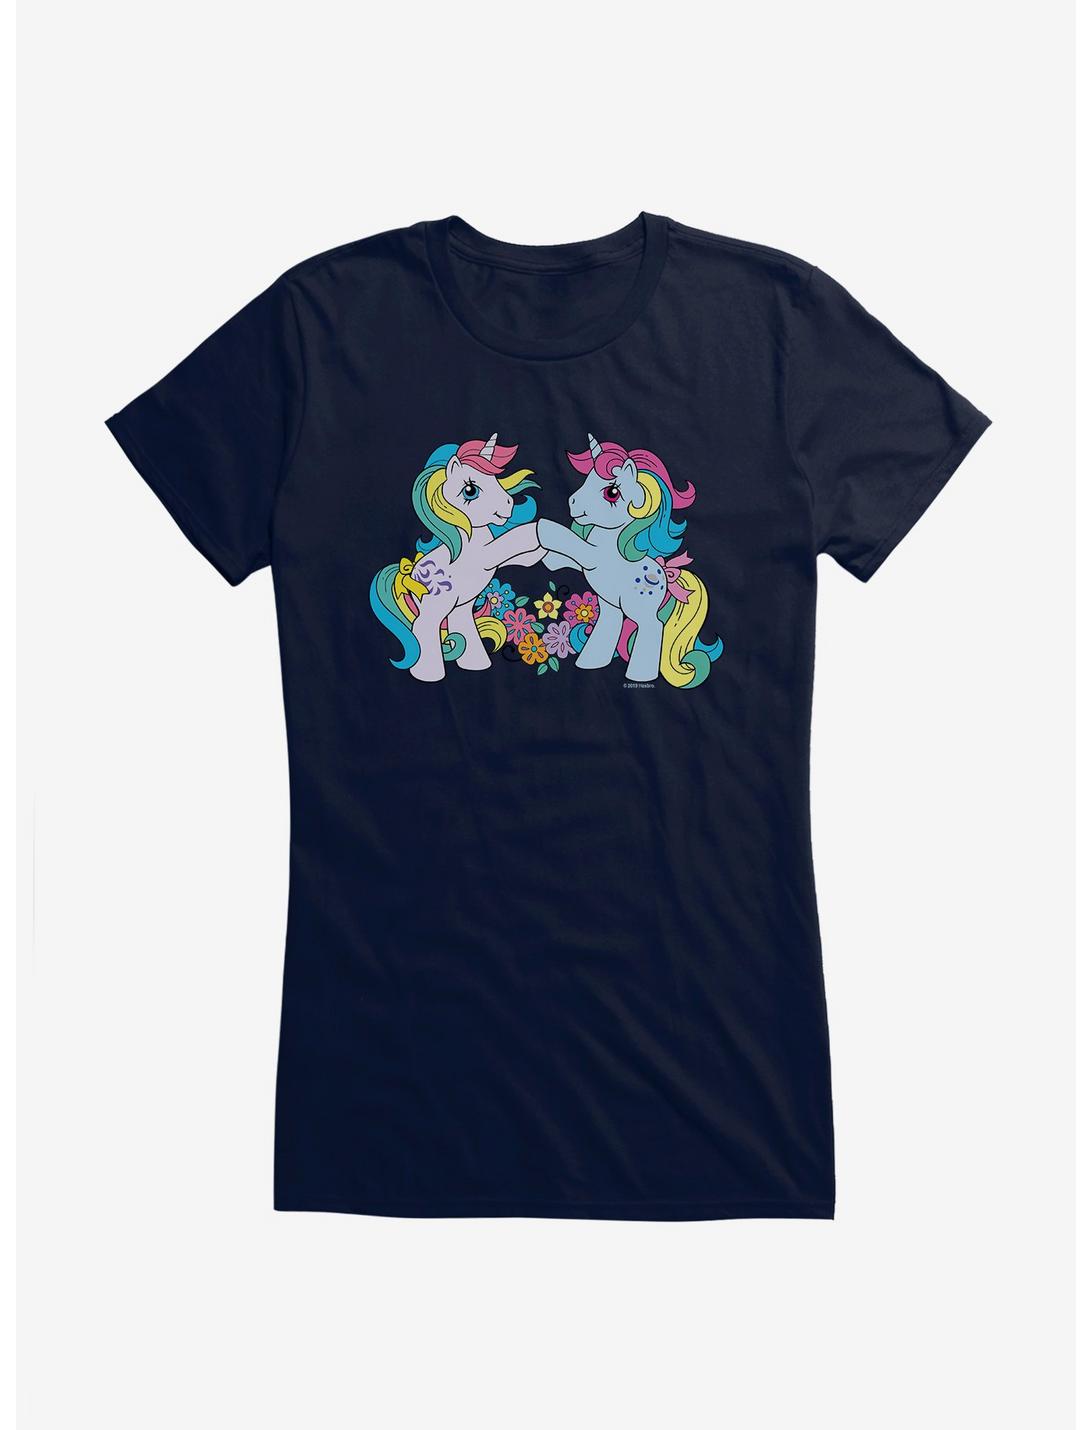 My Little Pony Field Of Flowers Girls T-Shirt, NAVY, hi-res